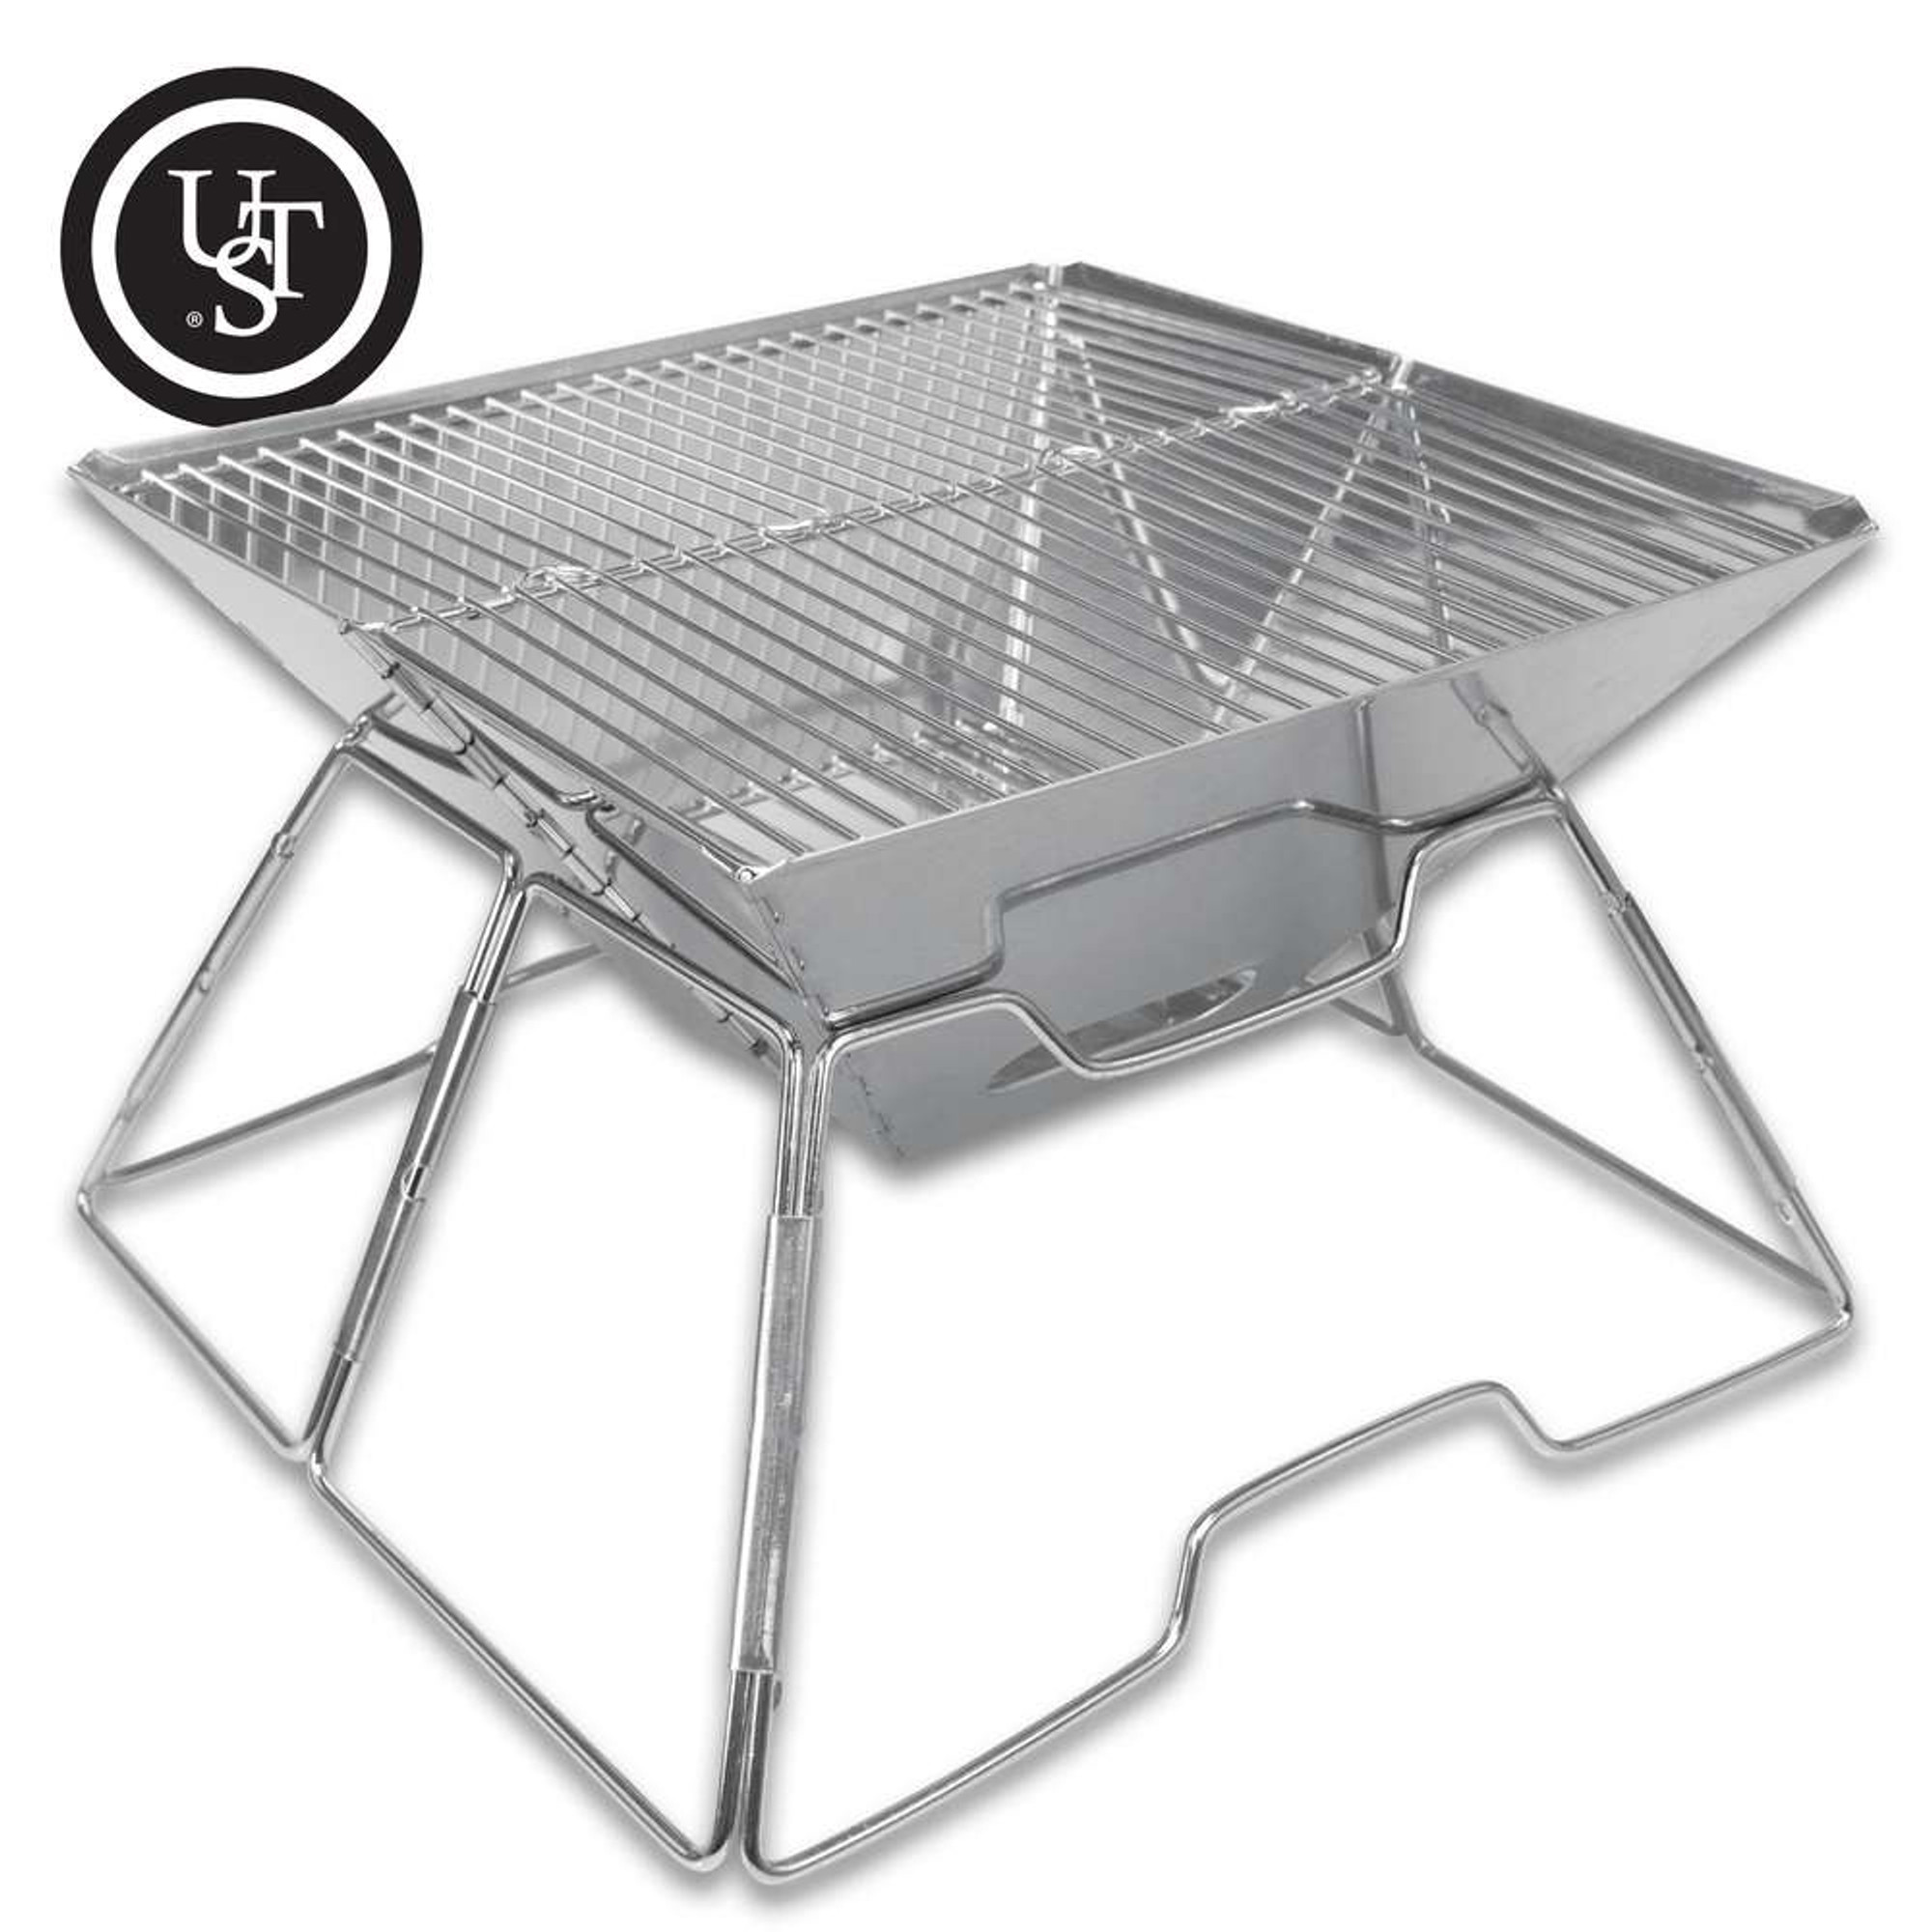 UST Pack-A-Long Grill With Storage Bag